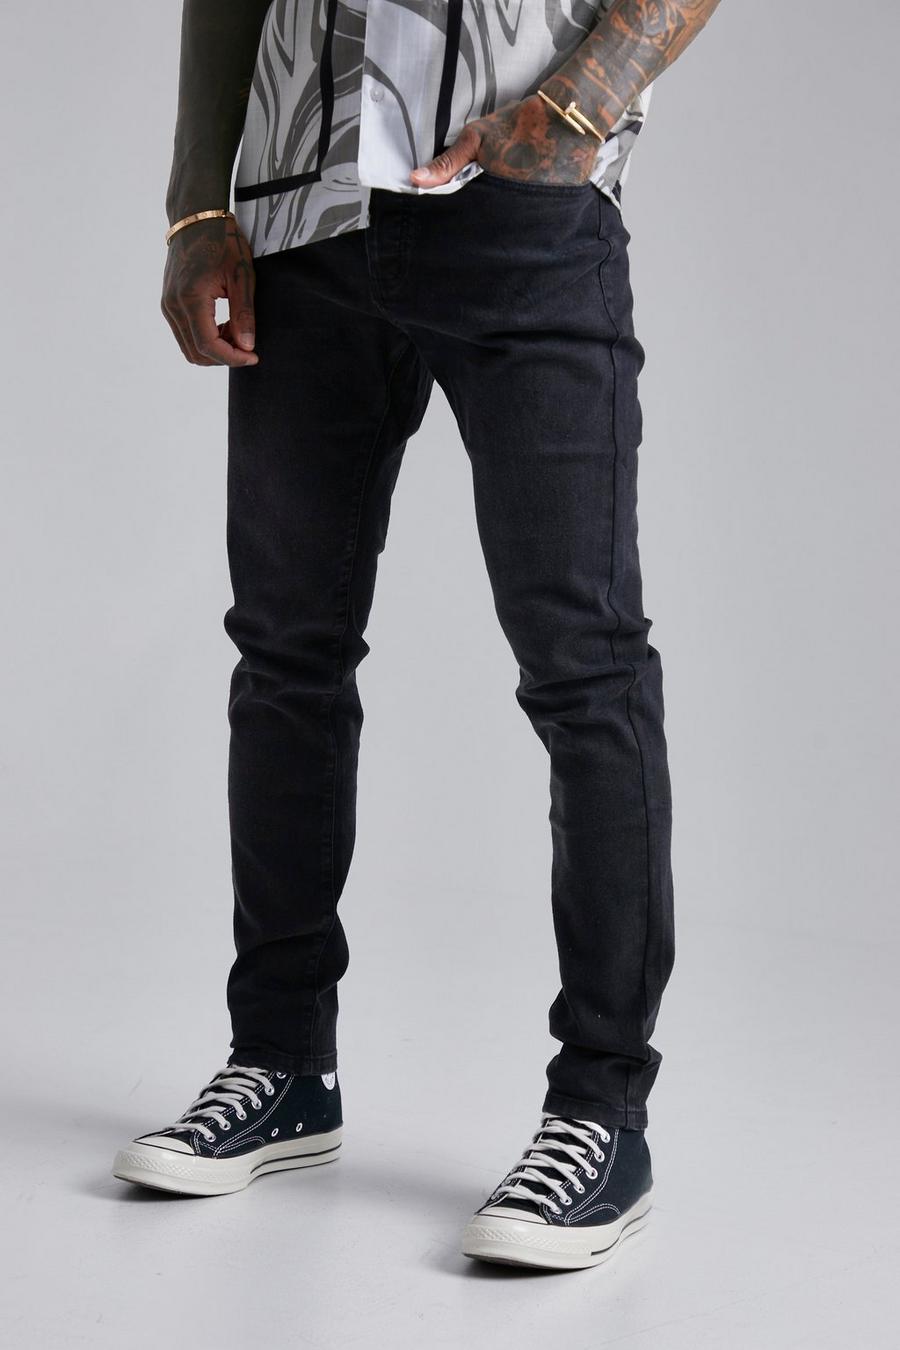 Washed black Skinny Stretch Jean Contains Recycled Polyester